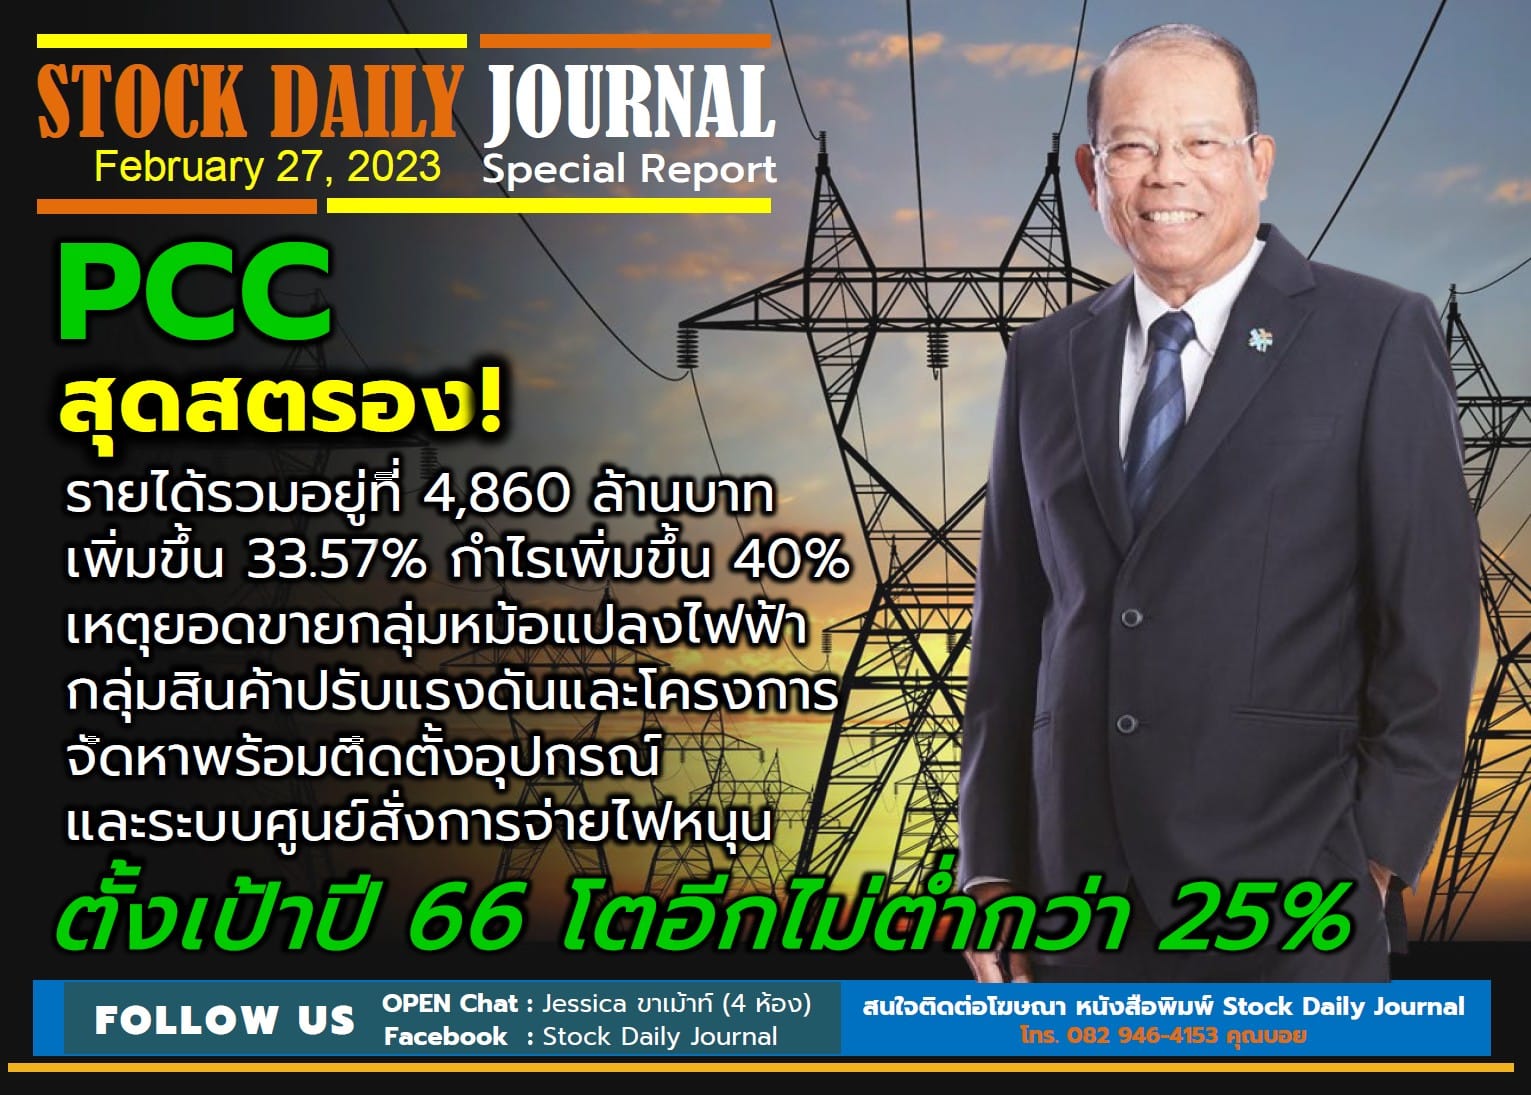 STOCK DAILY JOURNAL “Special Report : PCC”